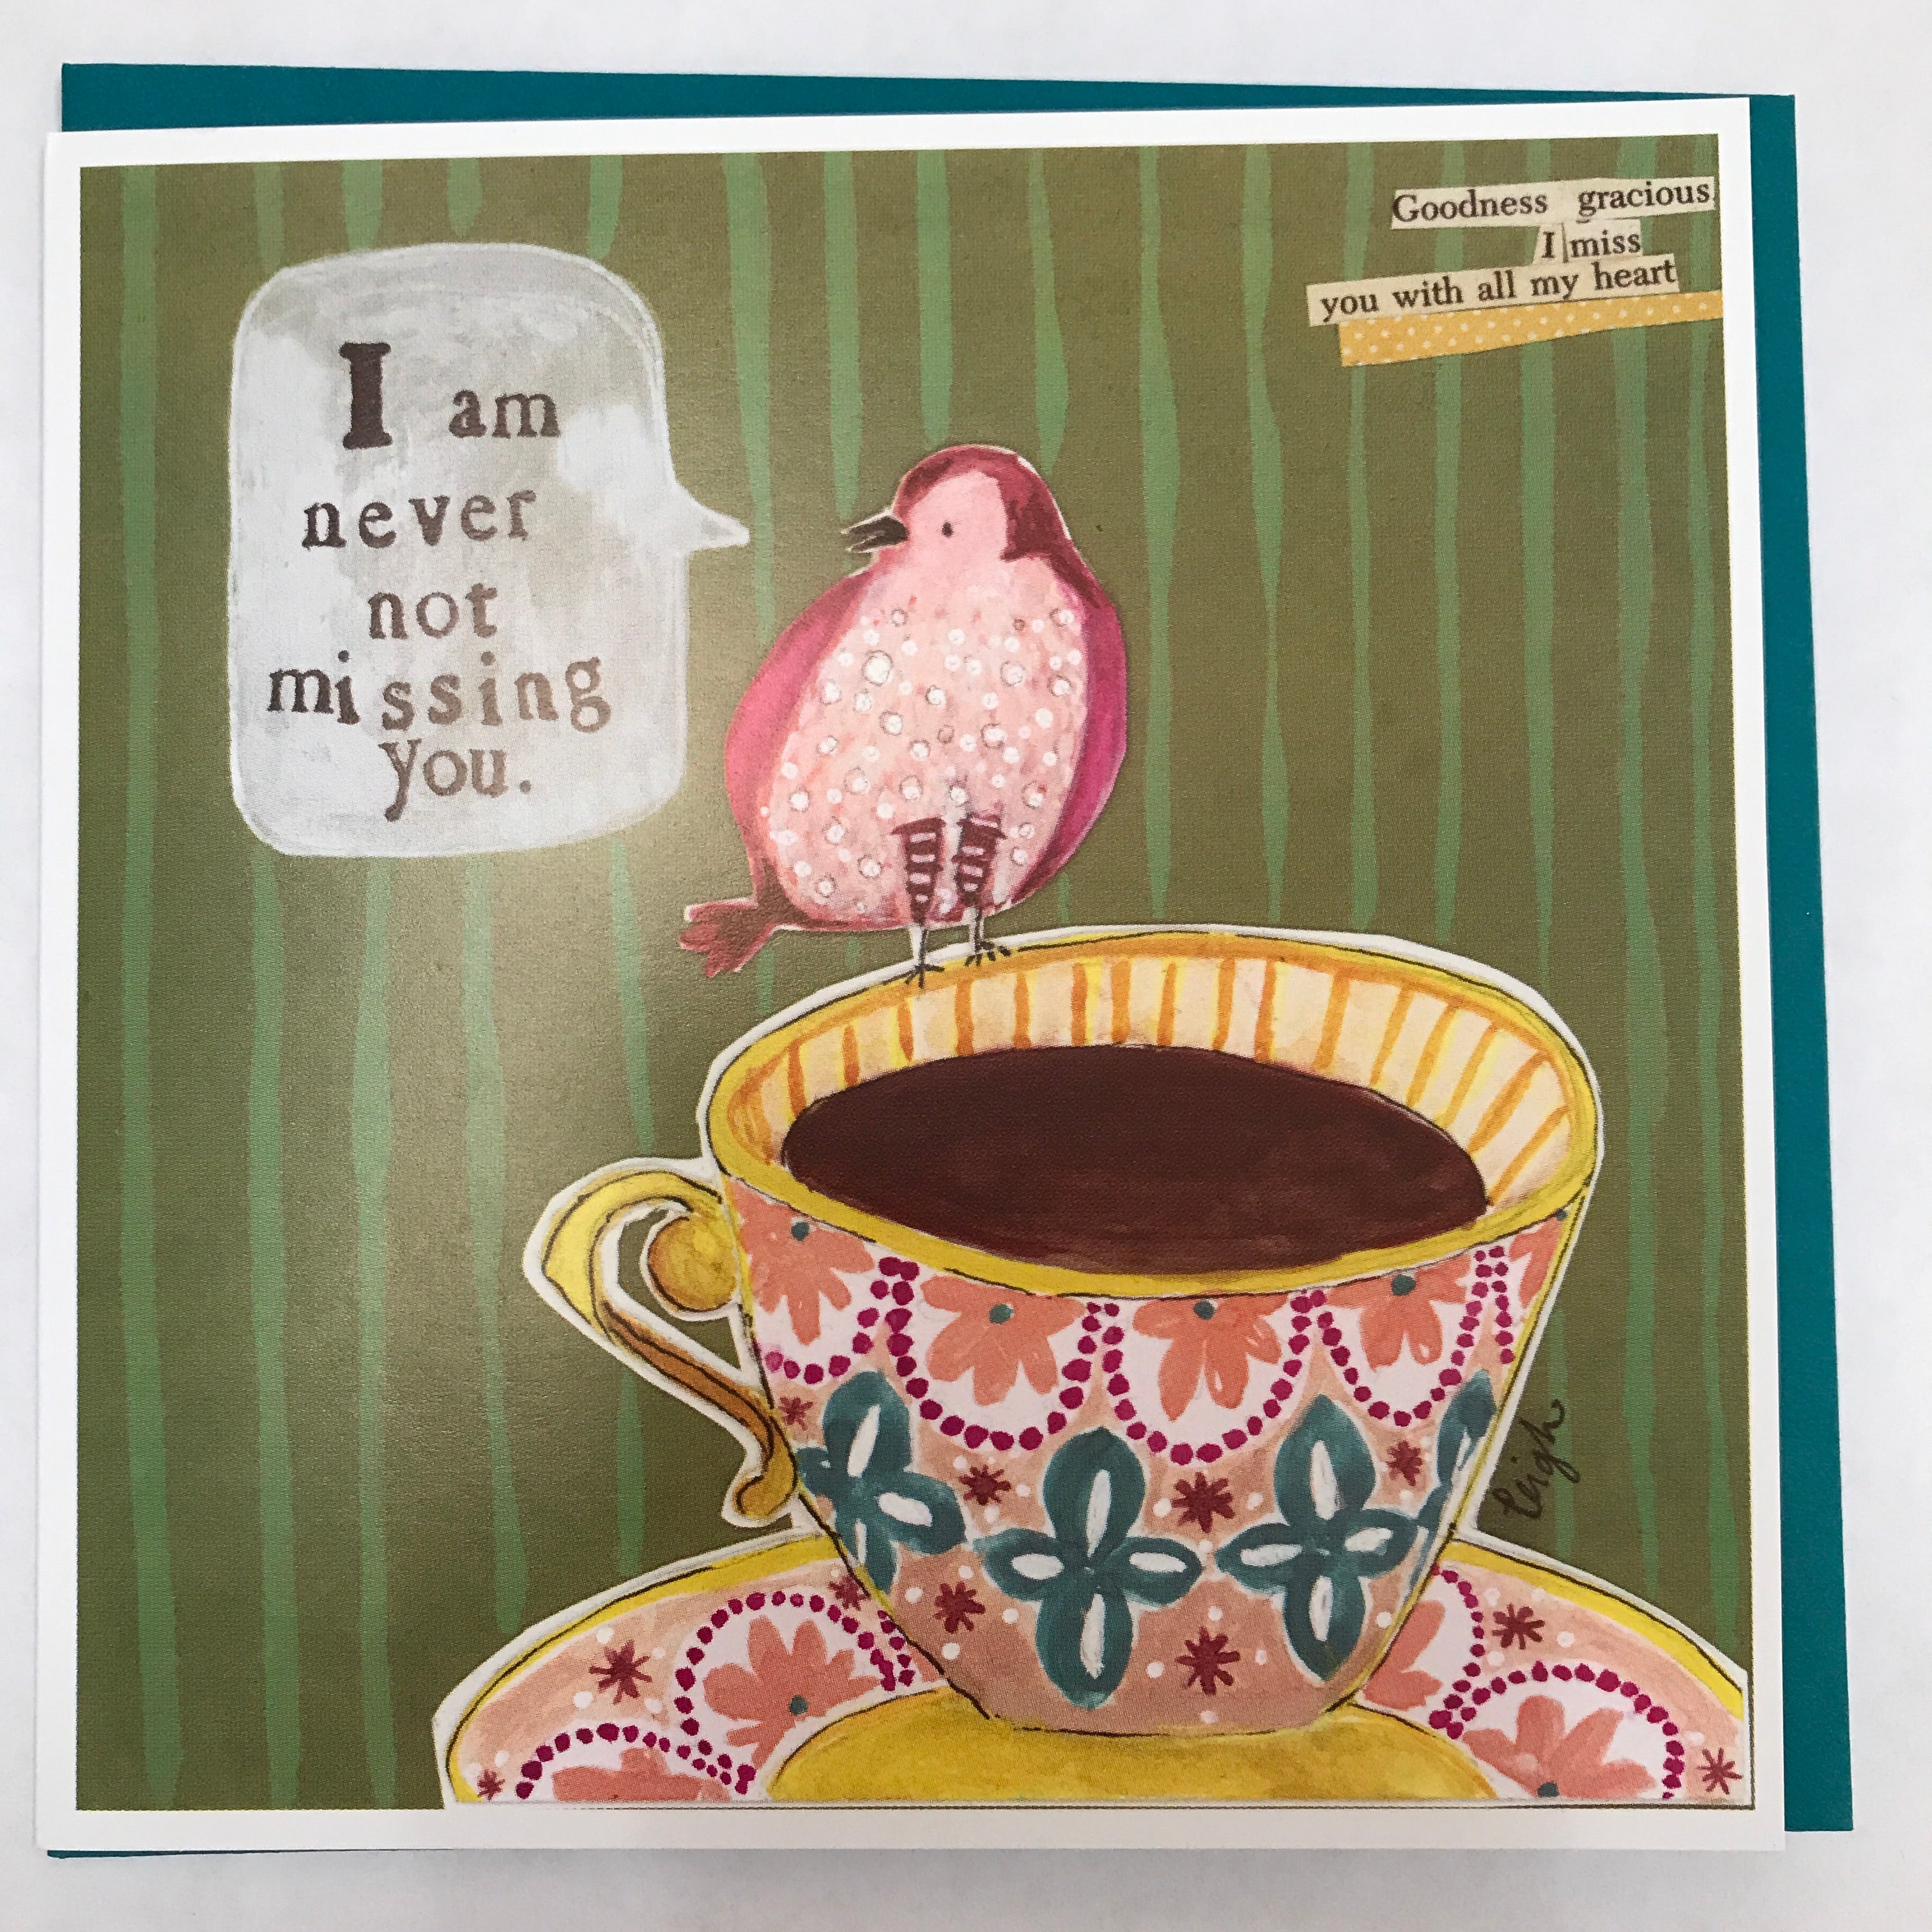 I am never not missing you Greeting Card